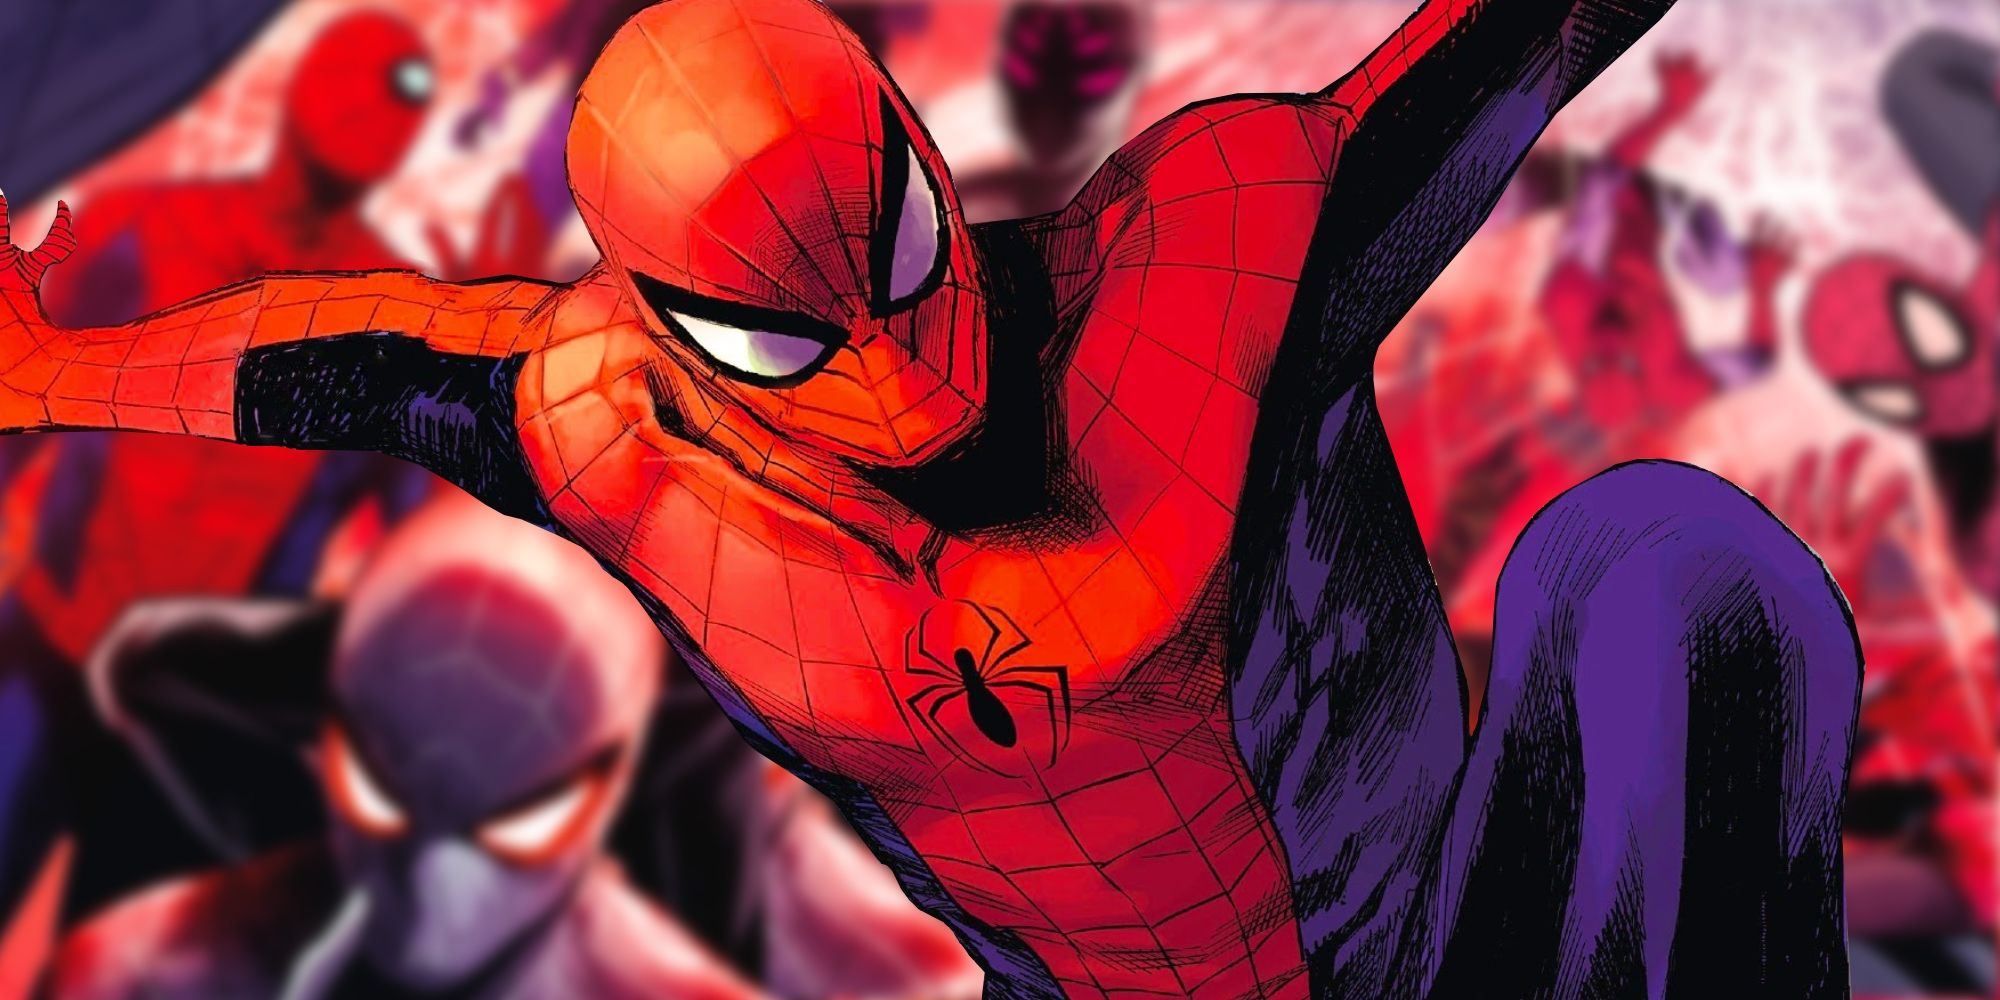 Spider-Man and Spider-Verse in Marvel Comics